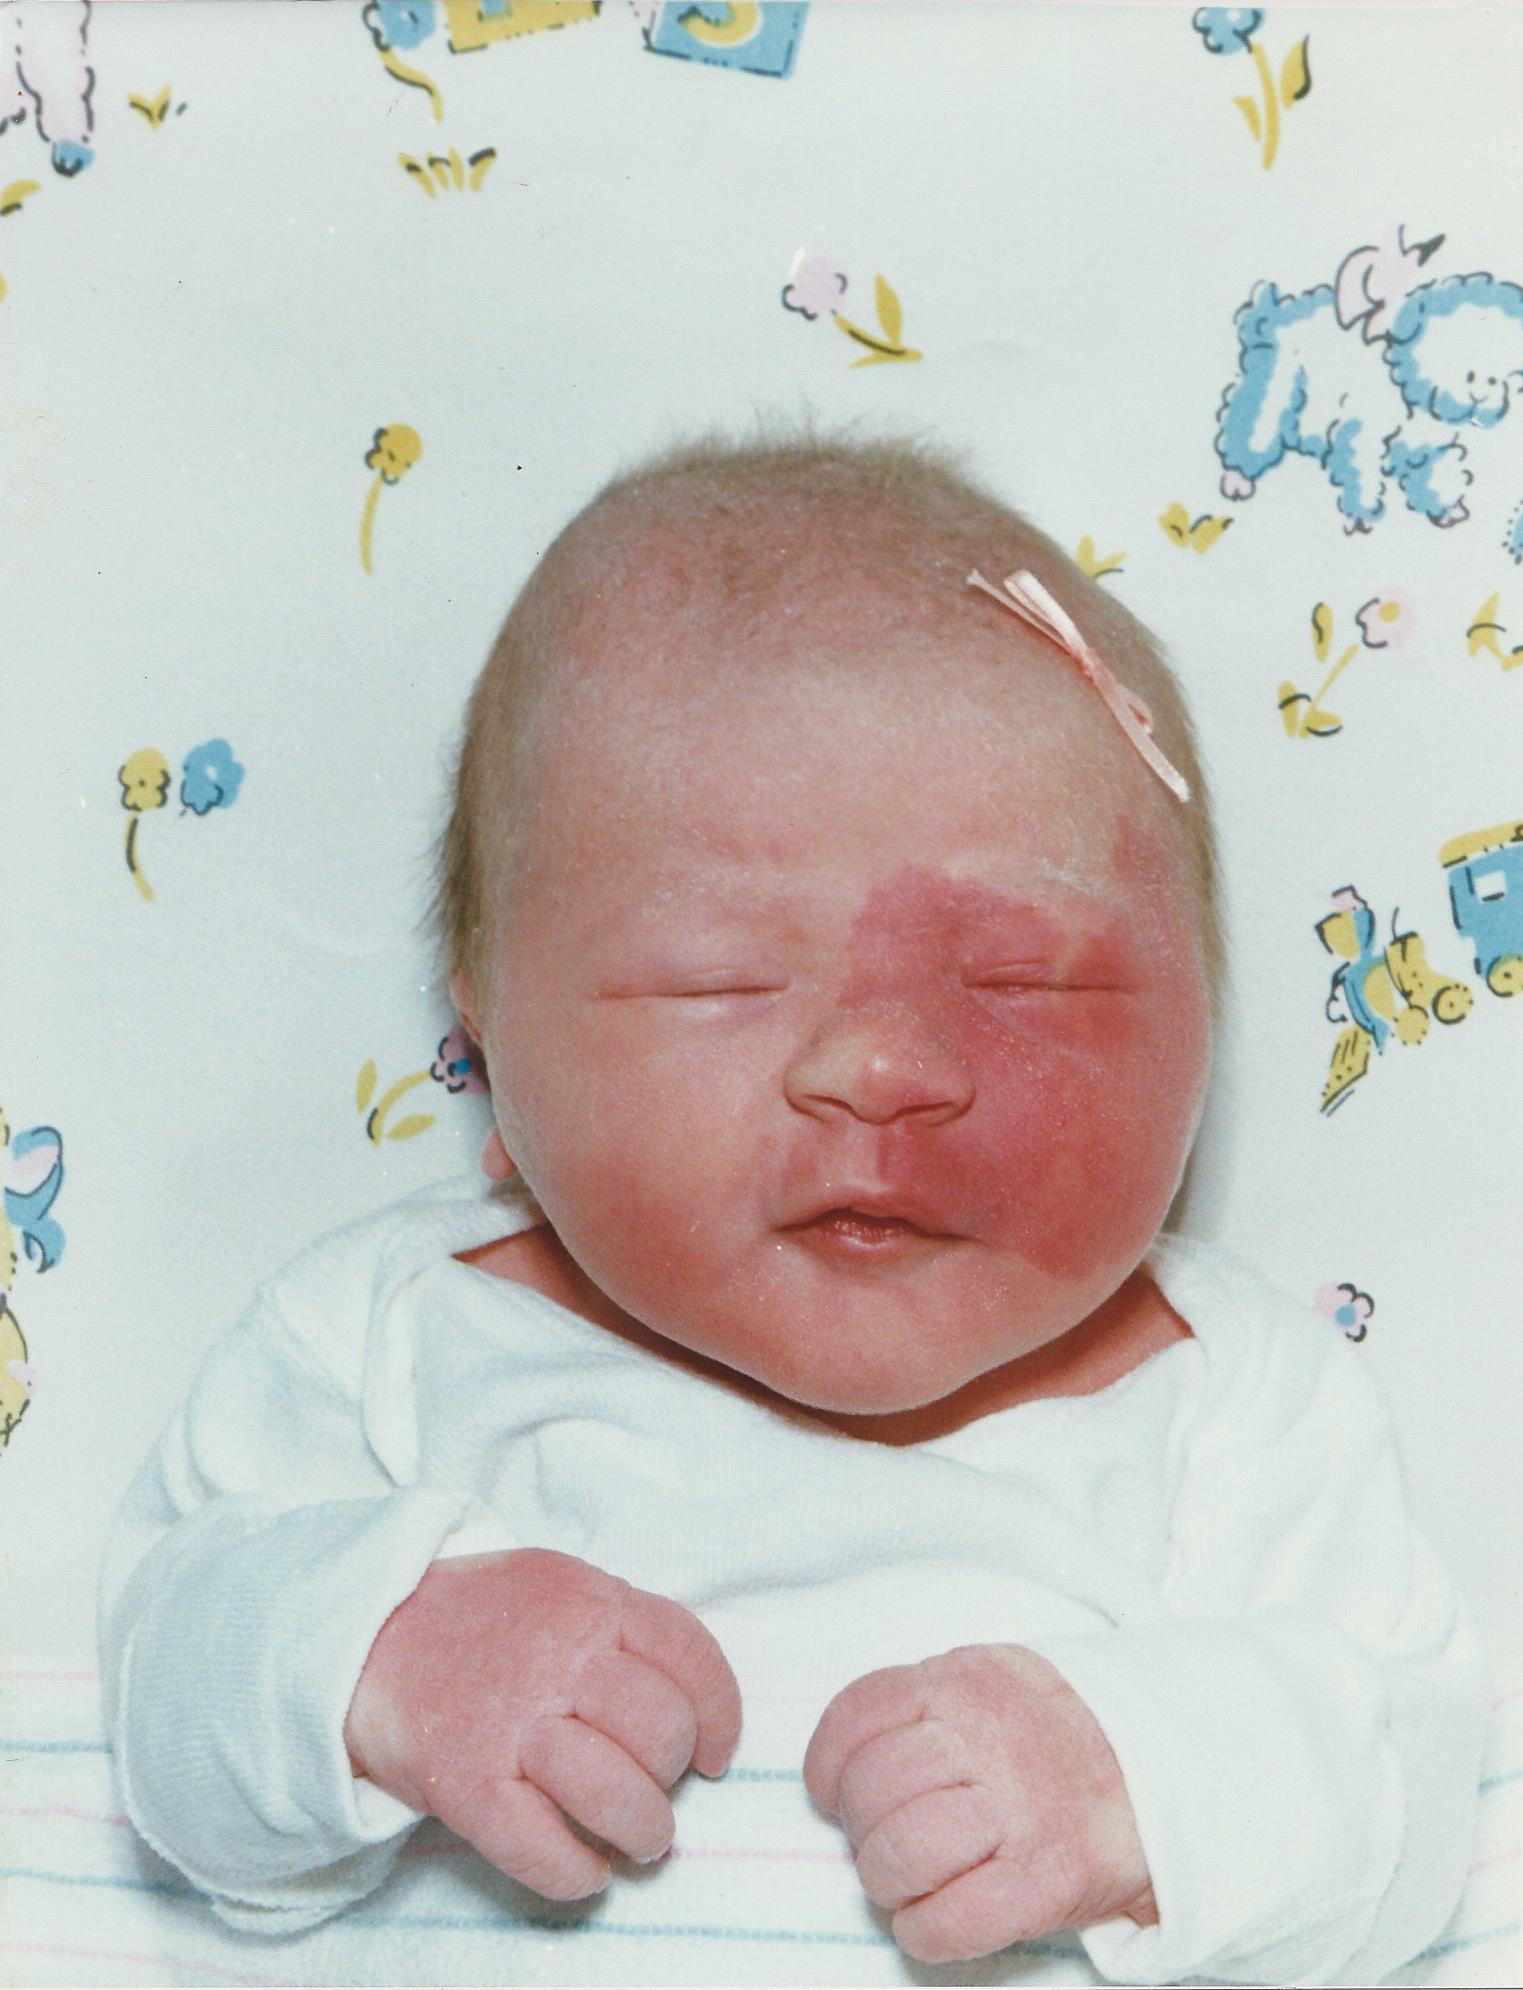 A newborn photo of Crystal, wearing a pink bow in her hear laying on a baby patterned blanket.